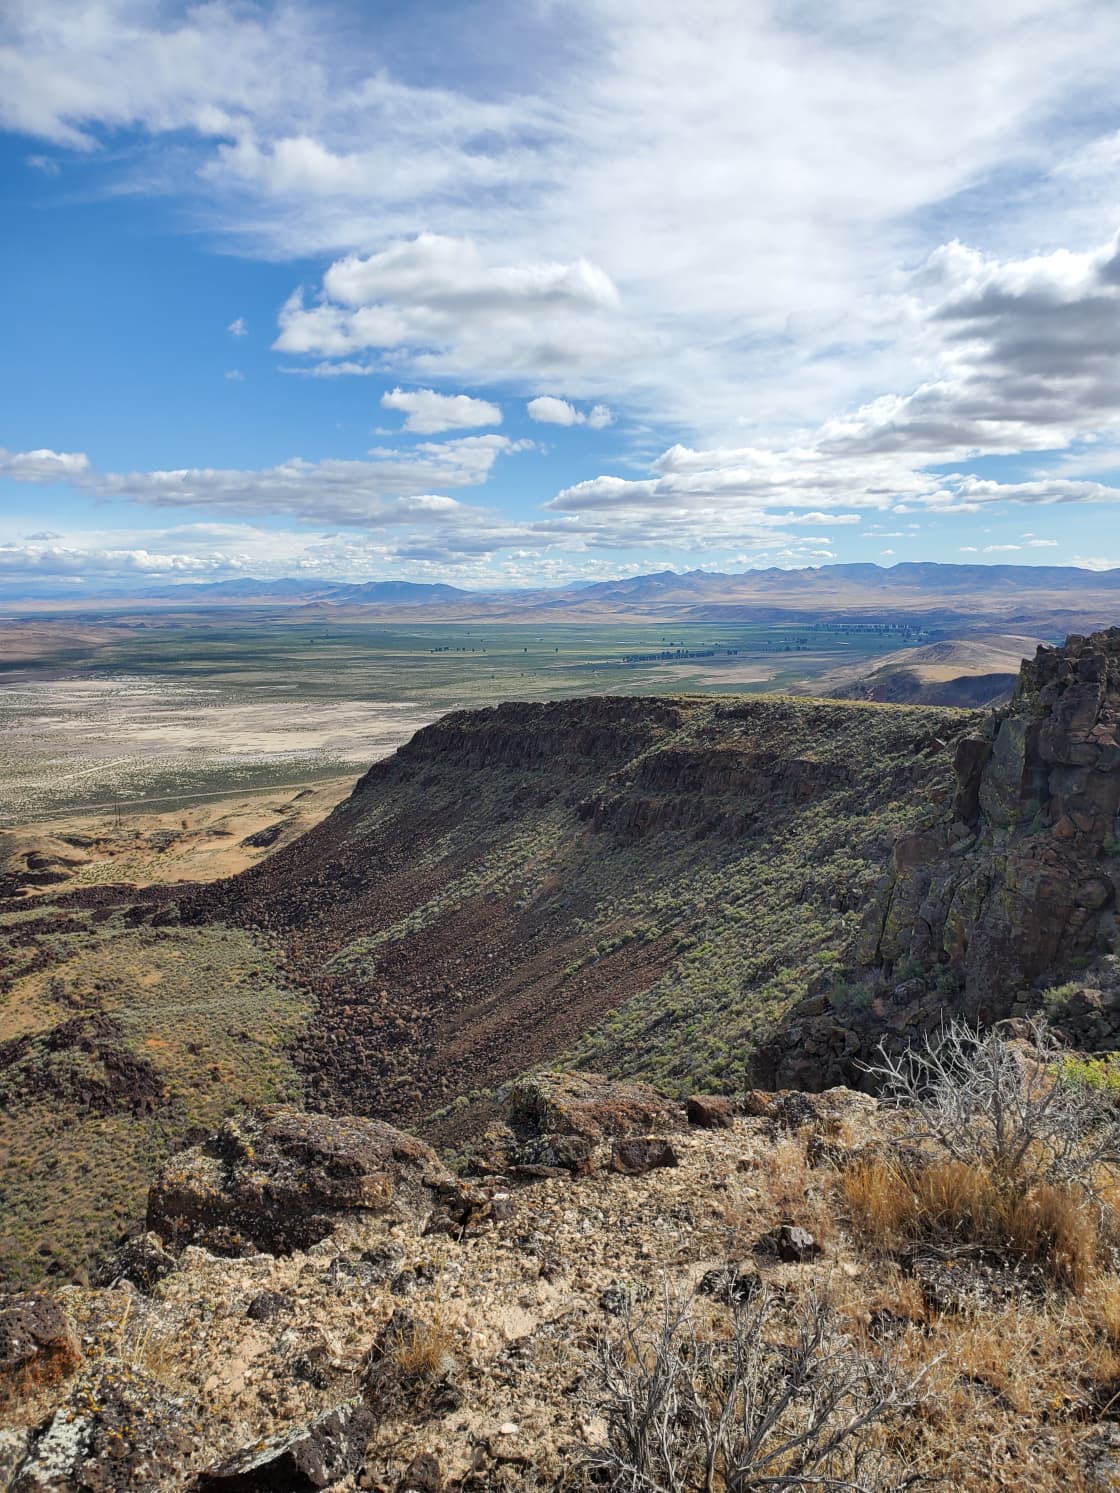 Hike to the top of the hill on BLM land adjacent to the campground for a fantastic 360 view of Whirlwind and Cresent Valleys.